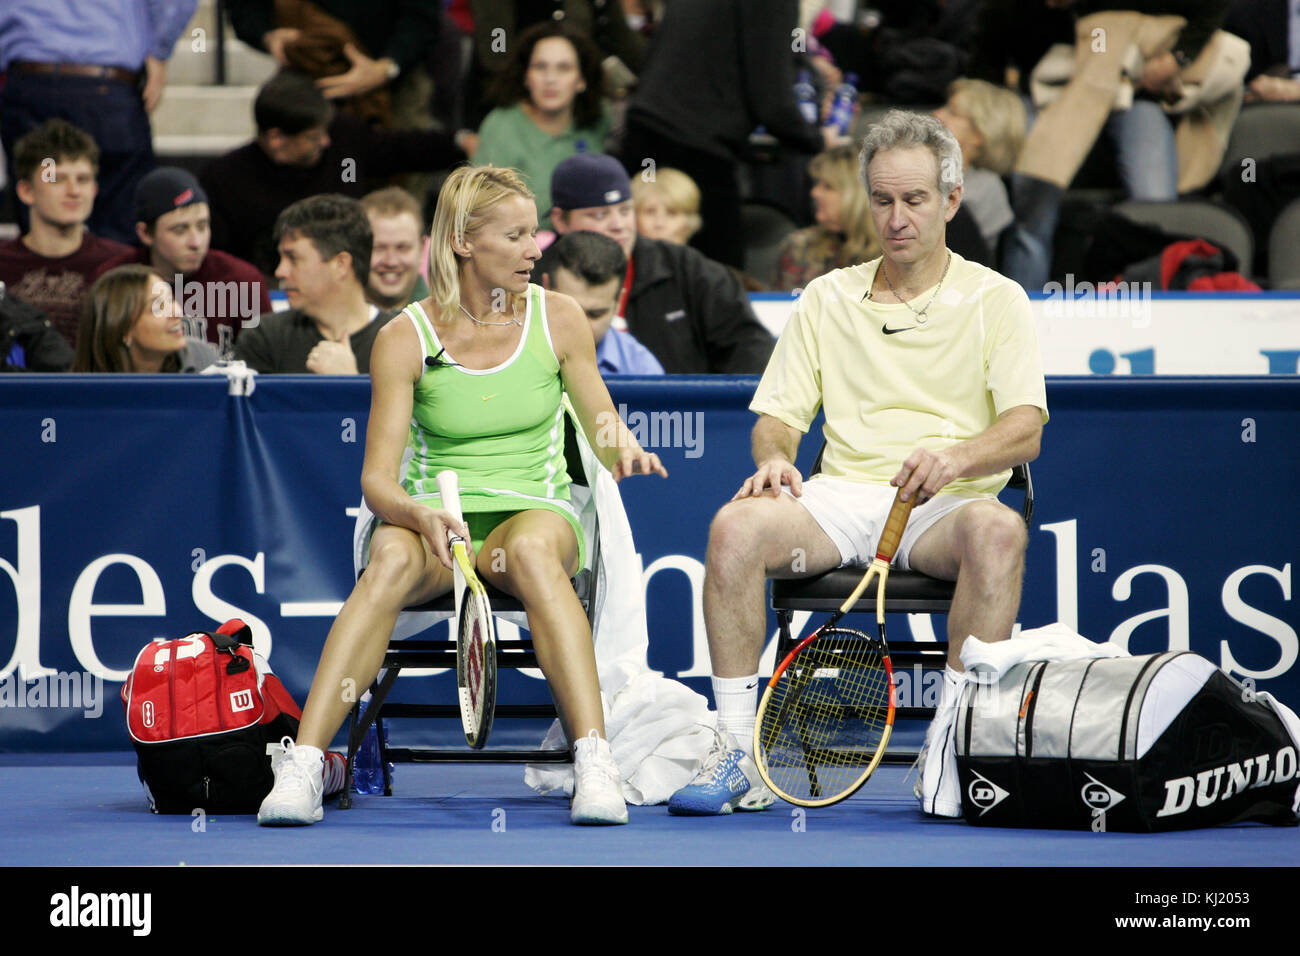 ***JANA NOVOTNA HAS PASSED AWAY*** Jana Novotna competes in an exhibition tennis match in the MERCEDES-BENZ CLASSIC at the Sears Centre in Hoffman Estates, IL. on February 12, 2007. Photo Credit: ©Rob Grabowski / MediaPunch Stock Photo